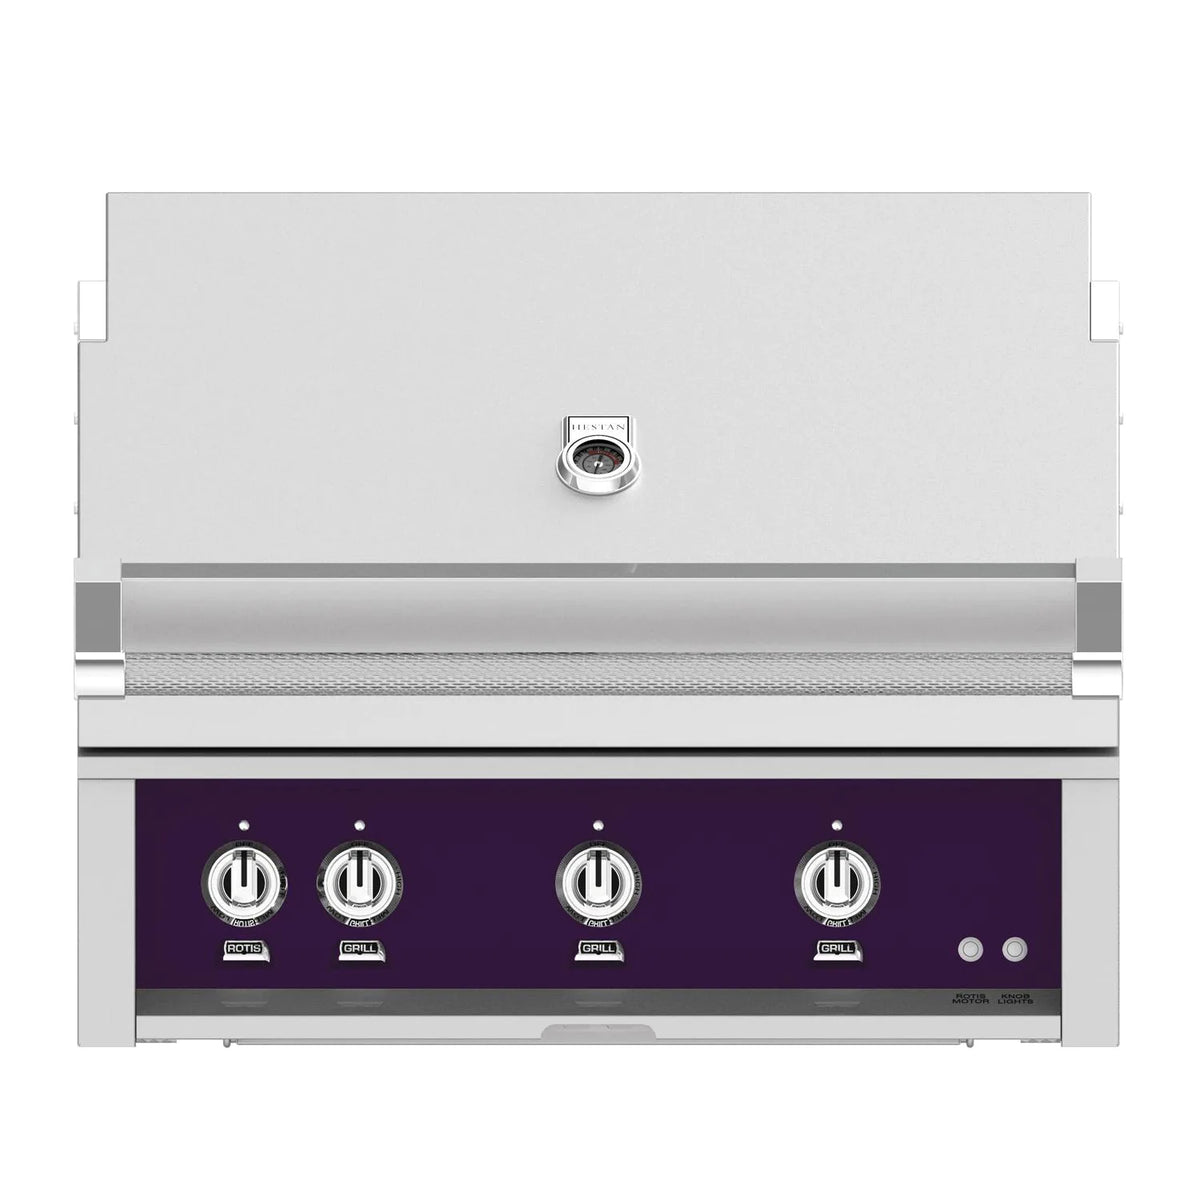 Hestan 36-Inch Built-In Gas Grill with Sear Burner and Rotisserie in purple color